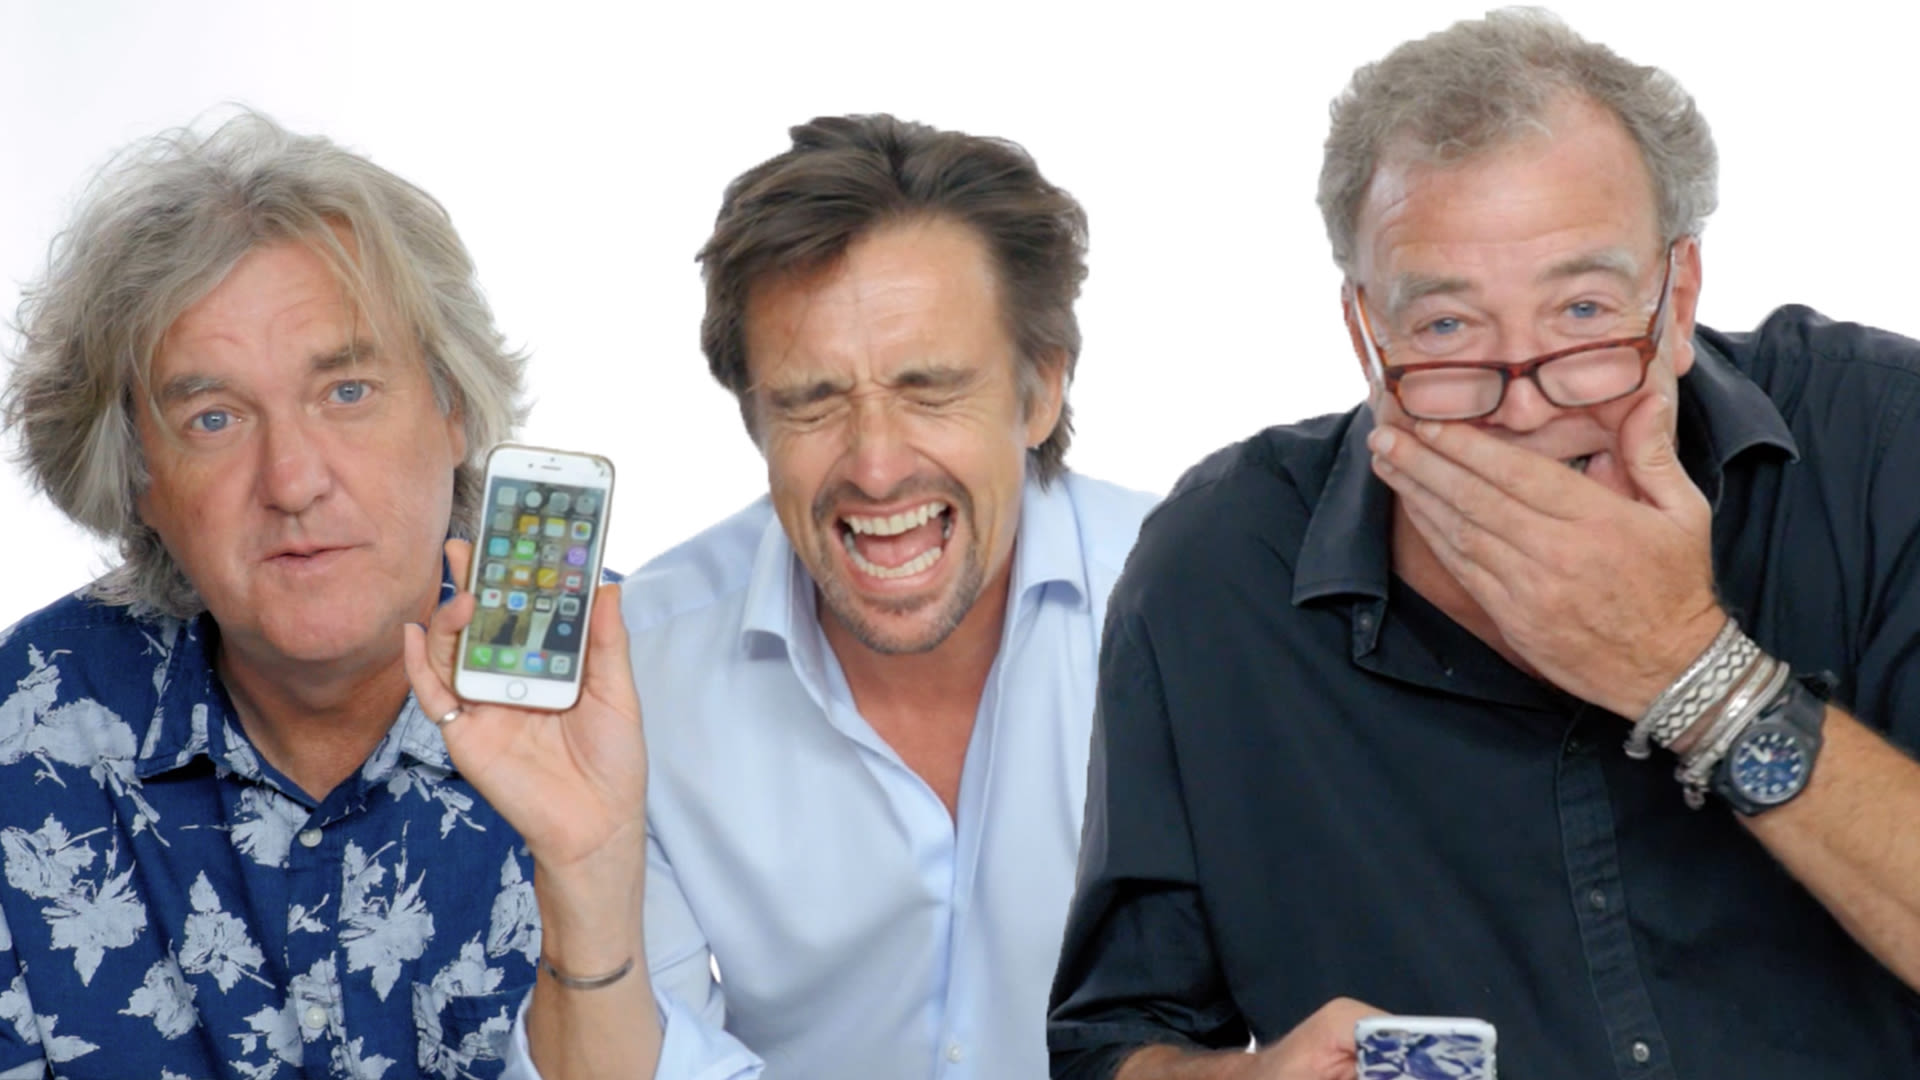 Watch Jeremy Clarkson, Richard Hammond & James May Us the Last Thing on Their Phones | WIRED